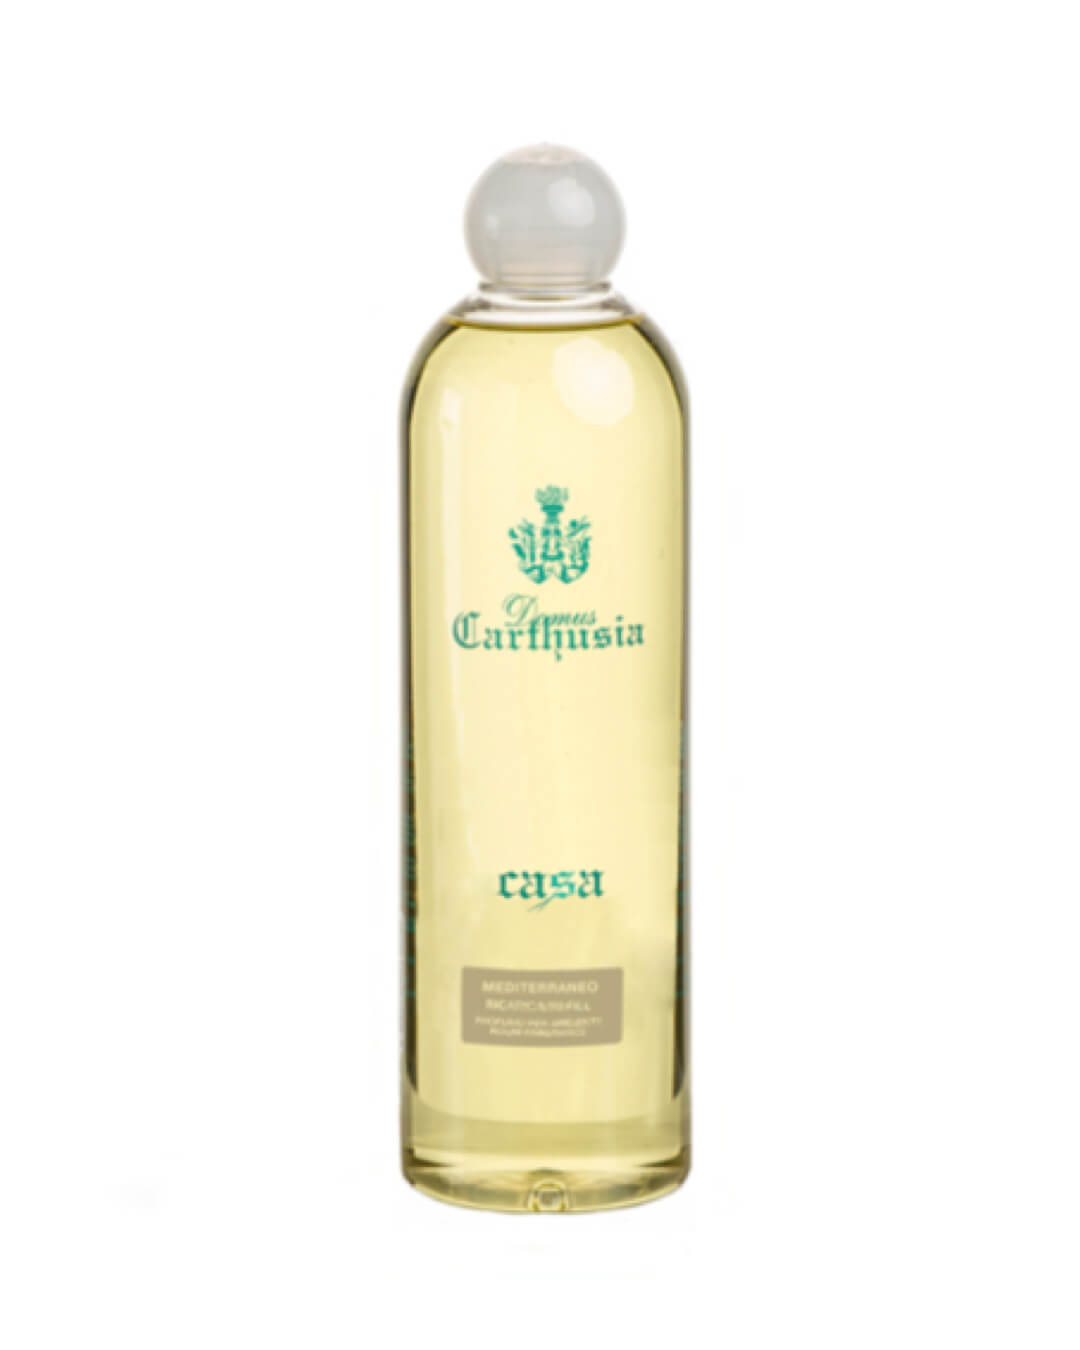 A tall, elegant glass bottle filled with yellow liquid, labeled "Carthusia Mediterraneo Reed Diffuser - 500ml" in ornate script, featuring a royal crest and the word "citrus" from Carthusia I Profumi de Capri.